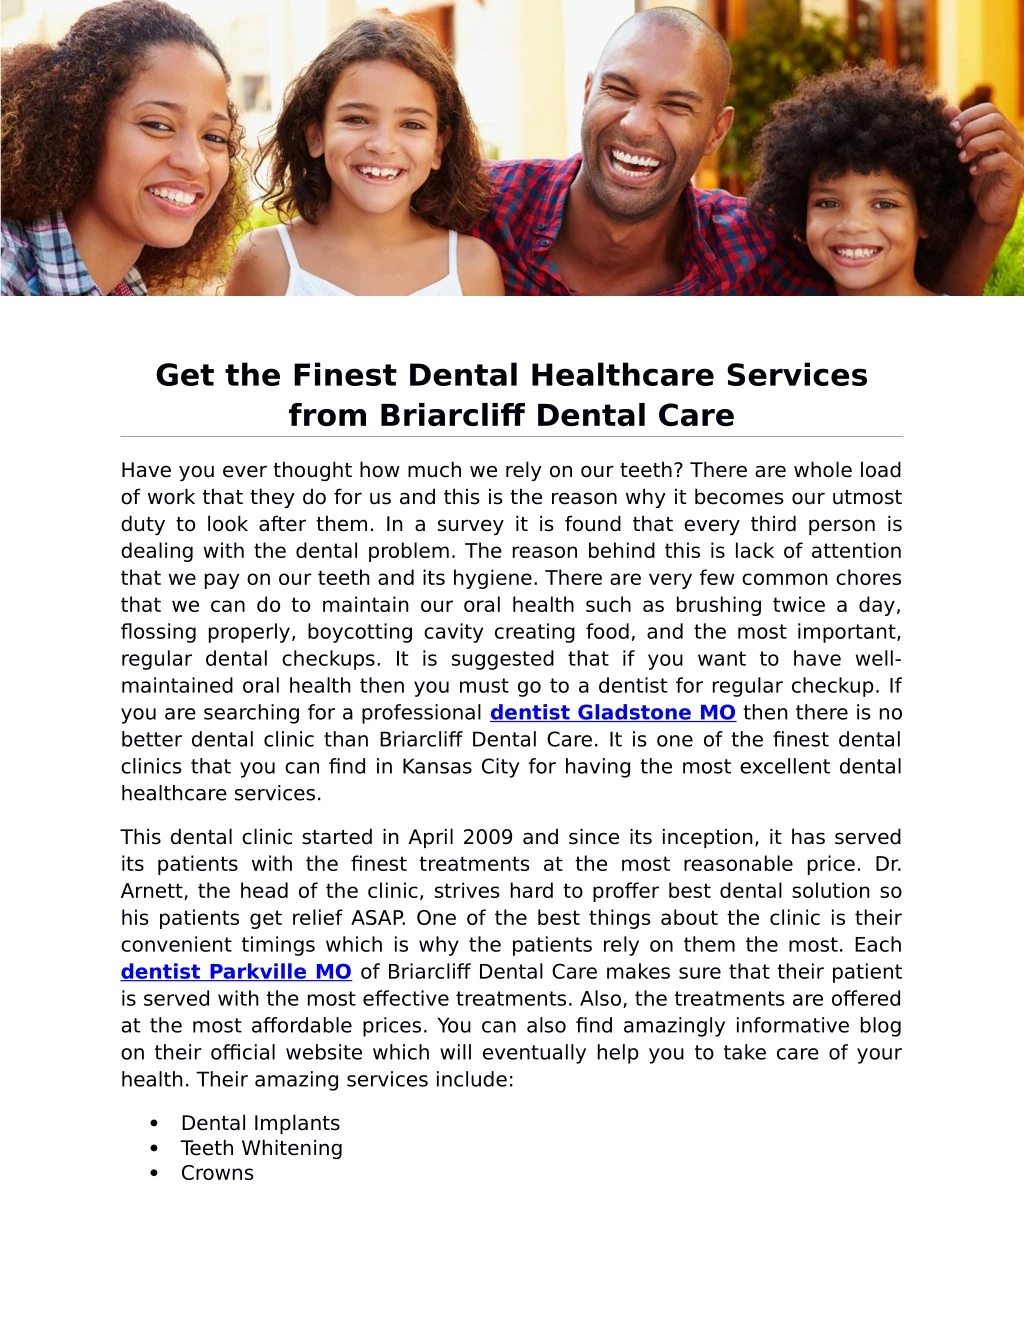 get the finest dental healthcare services from